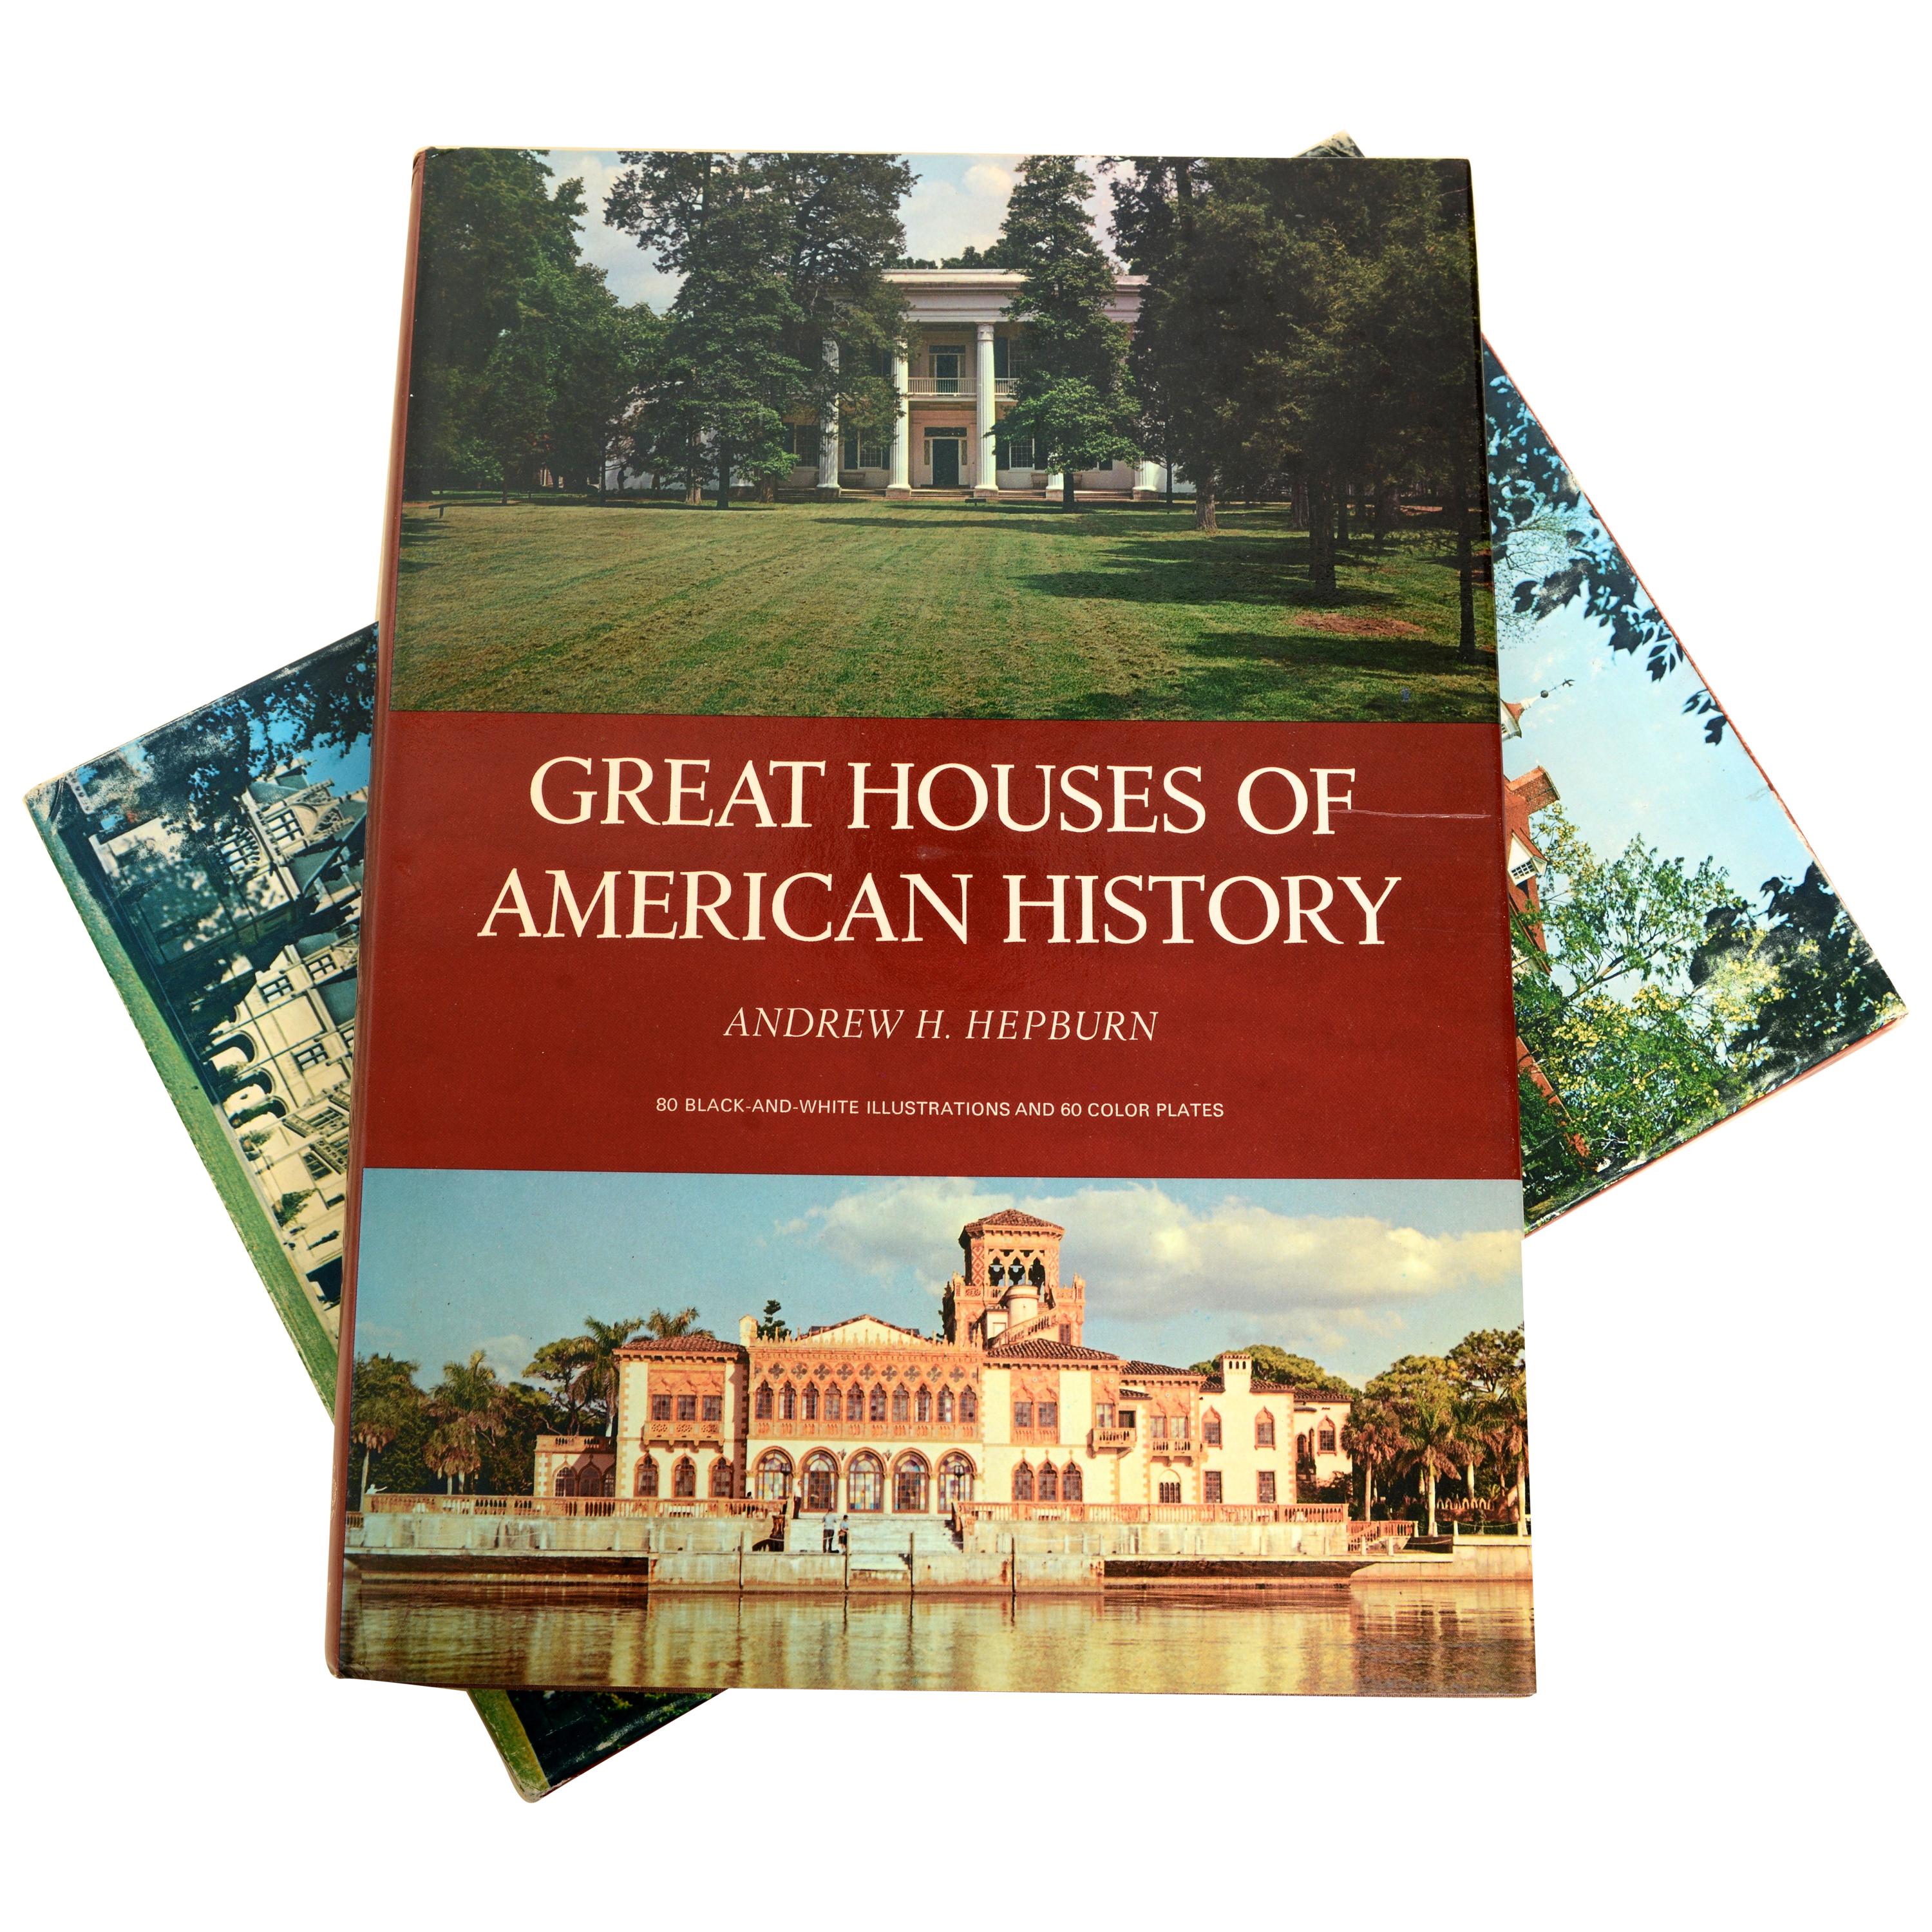 Great Houses of American History by Andrew H. Hepburn, Stated 1st Edition